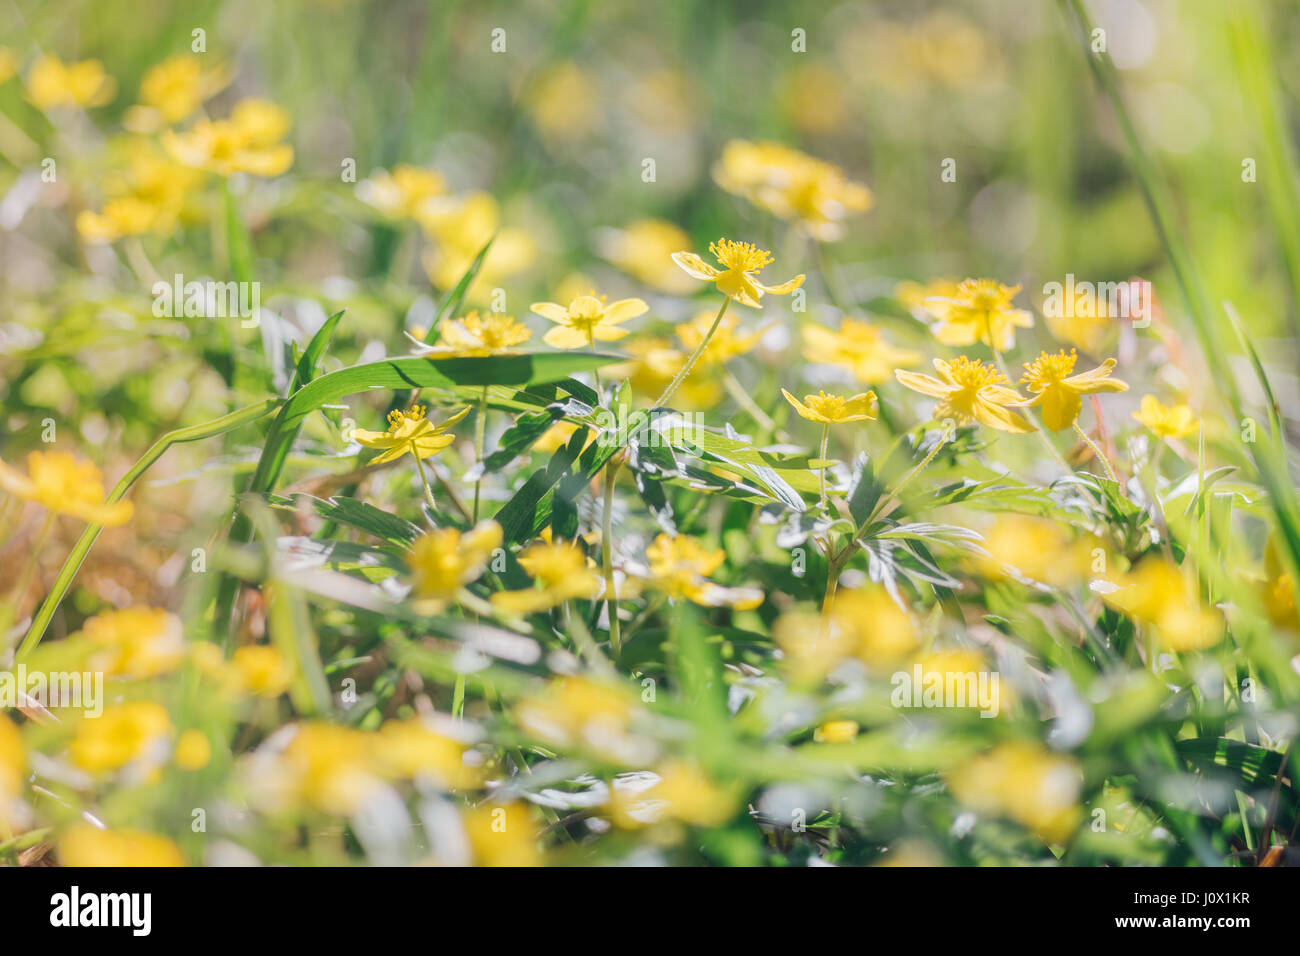 Springtime lawn with blossom buttercup flowers against bright sun Stock Photo